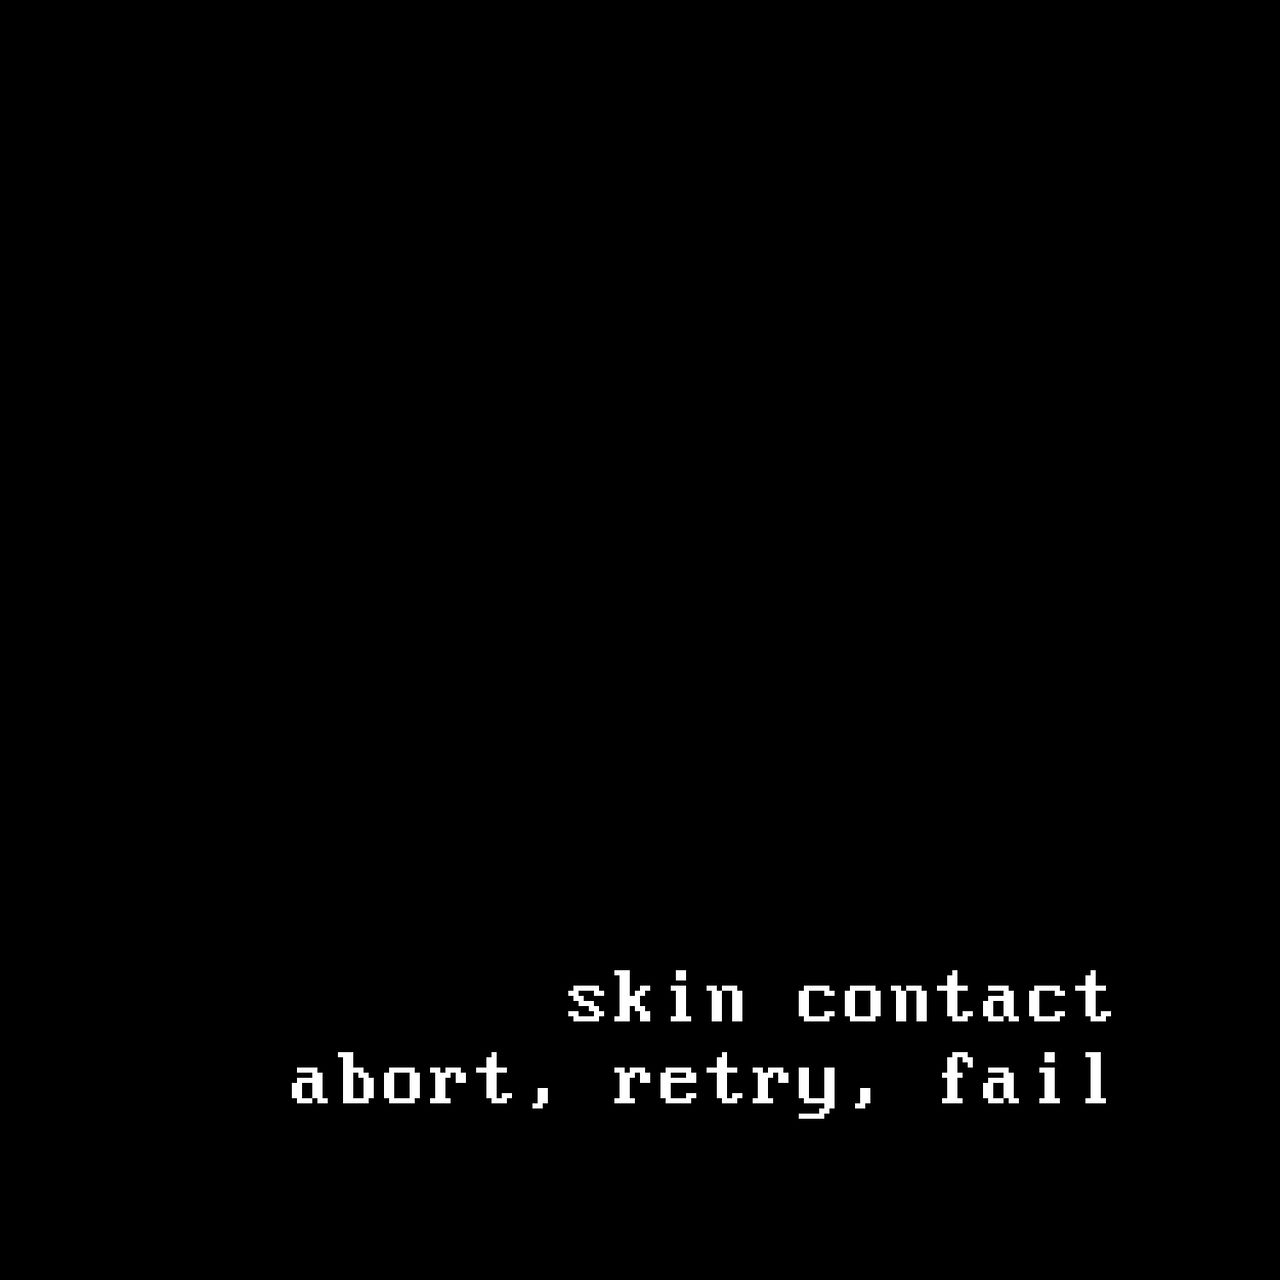 All-black cover with "skin contact abort, retry, fail" in white retro-computer-style letters in the lower right corner.